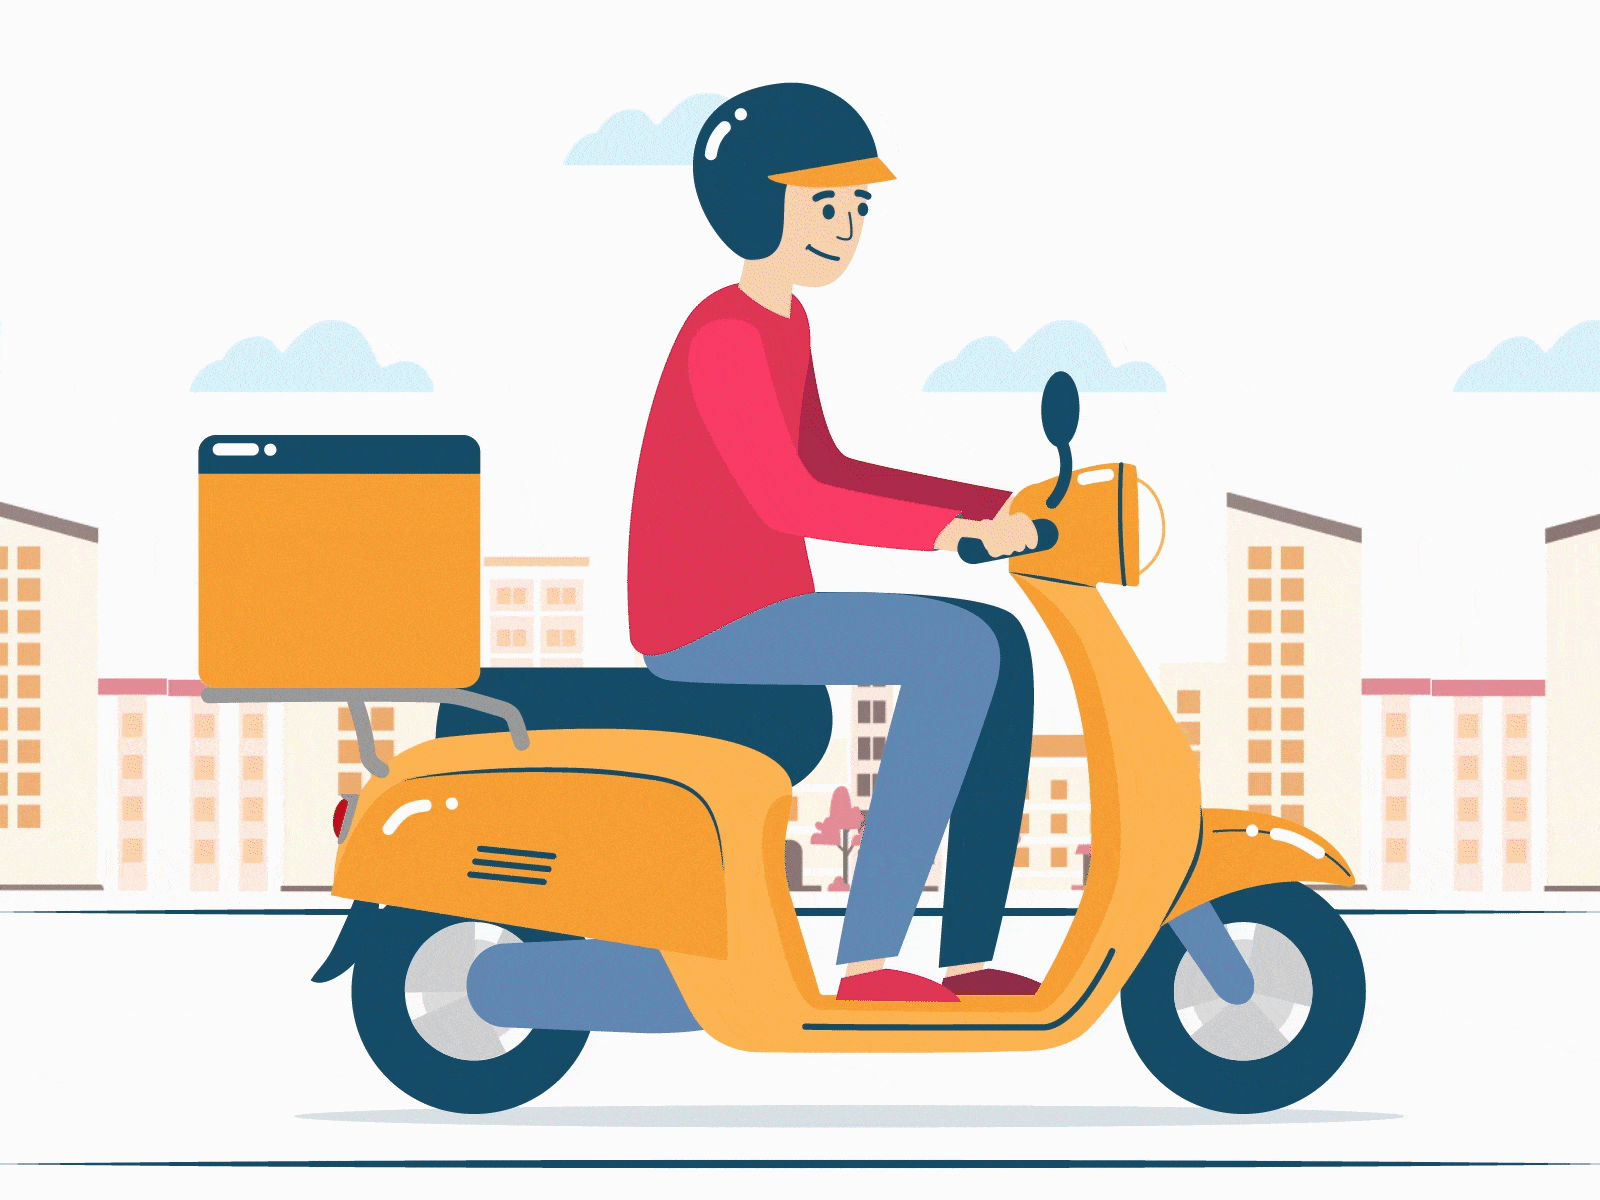 Online Delivery Boy - Animation animation big city life character character design city delivery service flat flat design food illustration man scooter scooter boy